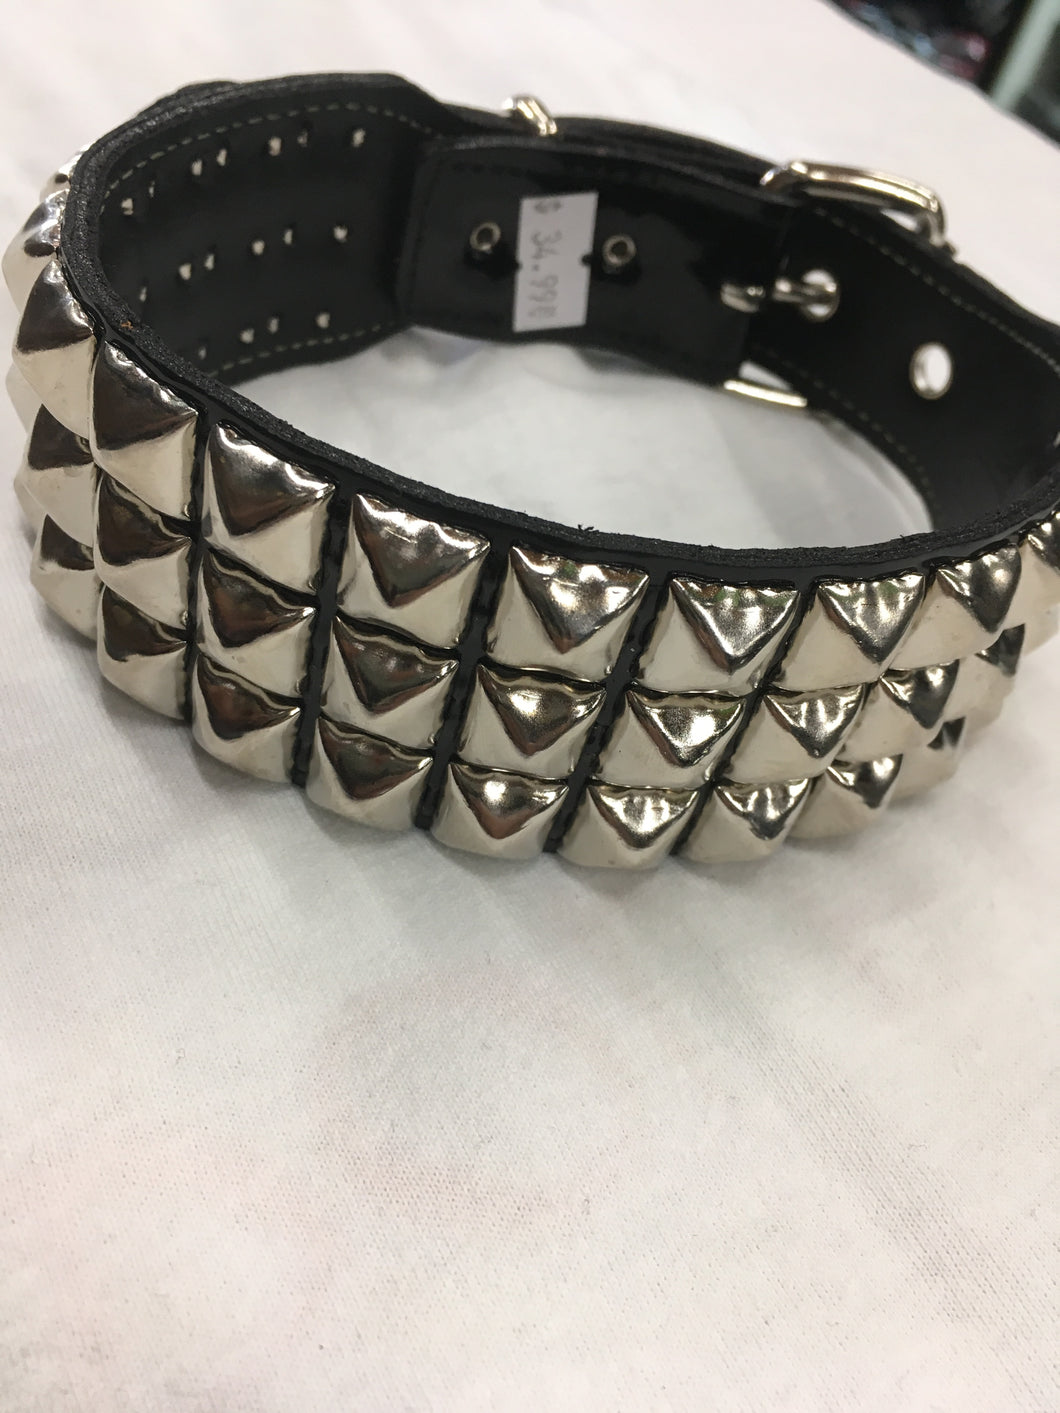 black leather collar with three rows of multiple silver pyramid studs. show adjustable buckle closure